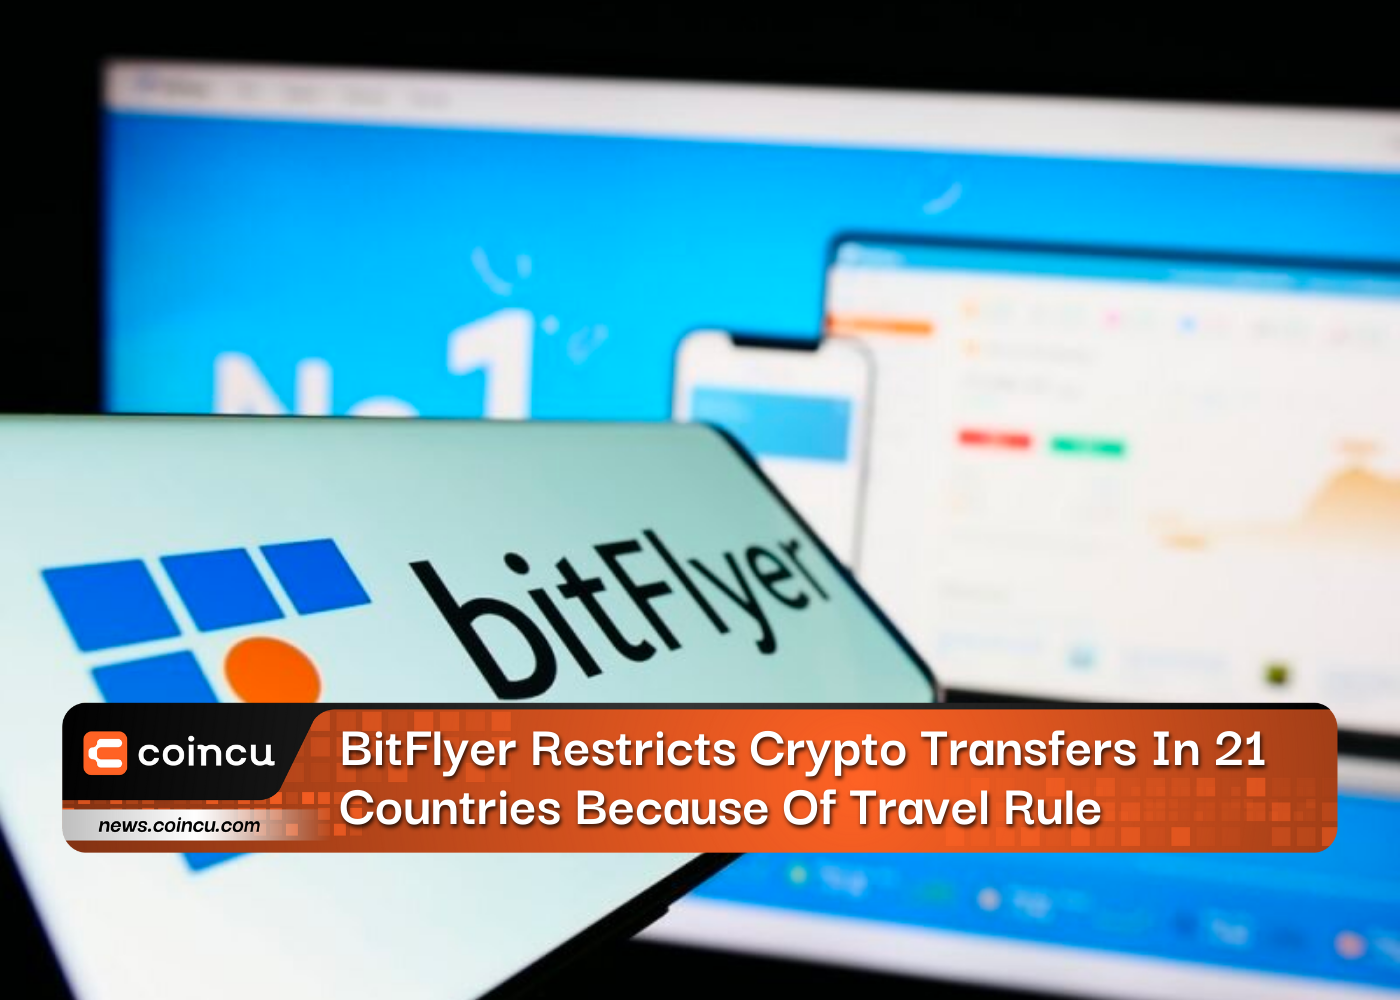 BitFlyer Restricts Crypto Transfers In 21 Countries Because Of Travel Rule